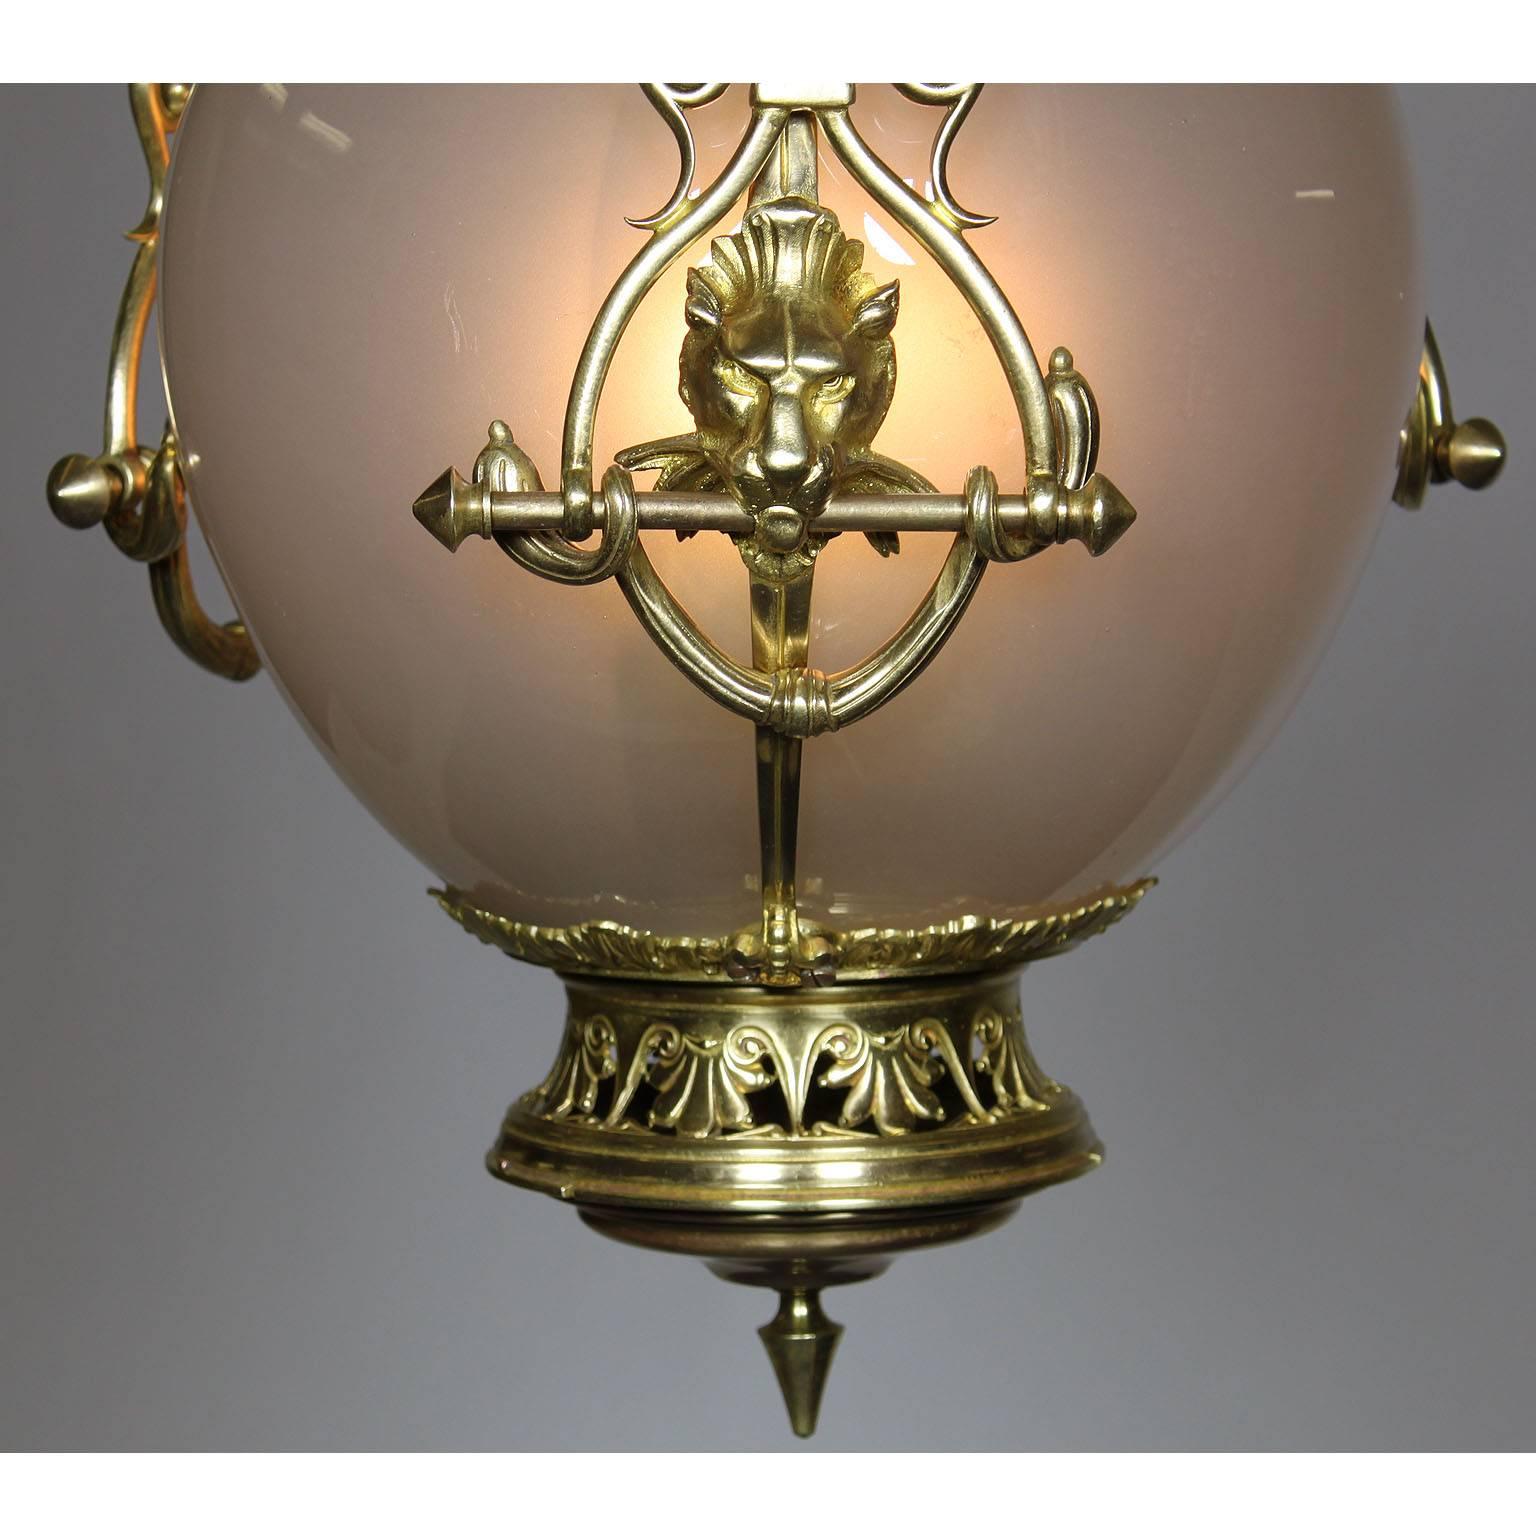 Neoclassical Revival Early 20th Century Gilt-Bronze and Opaline Glass Hanging Lantern with Lion Pelts For Sale